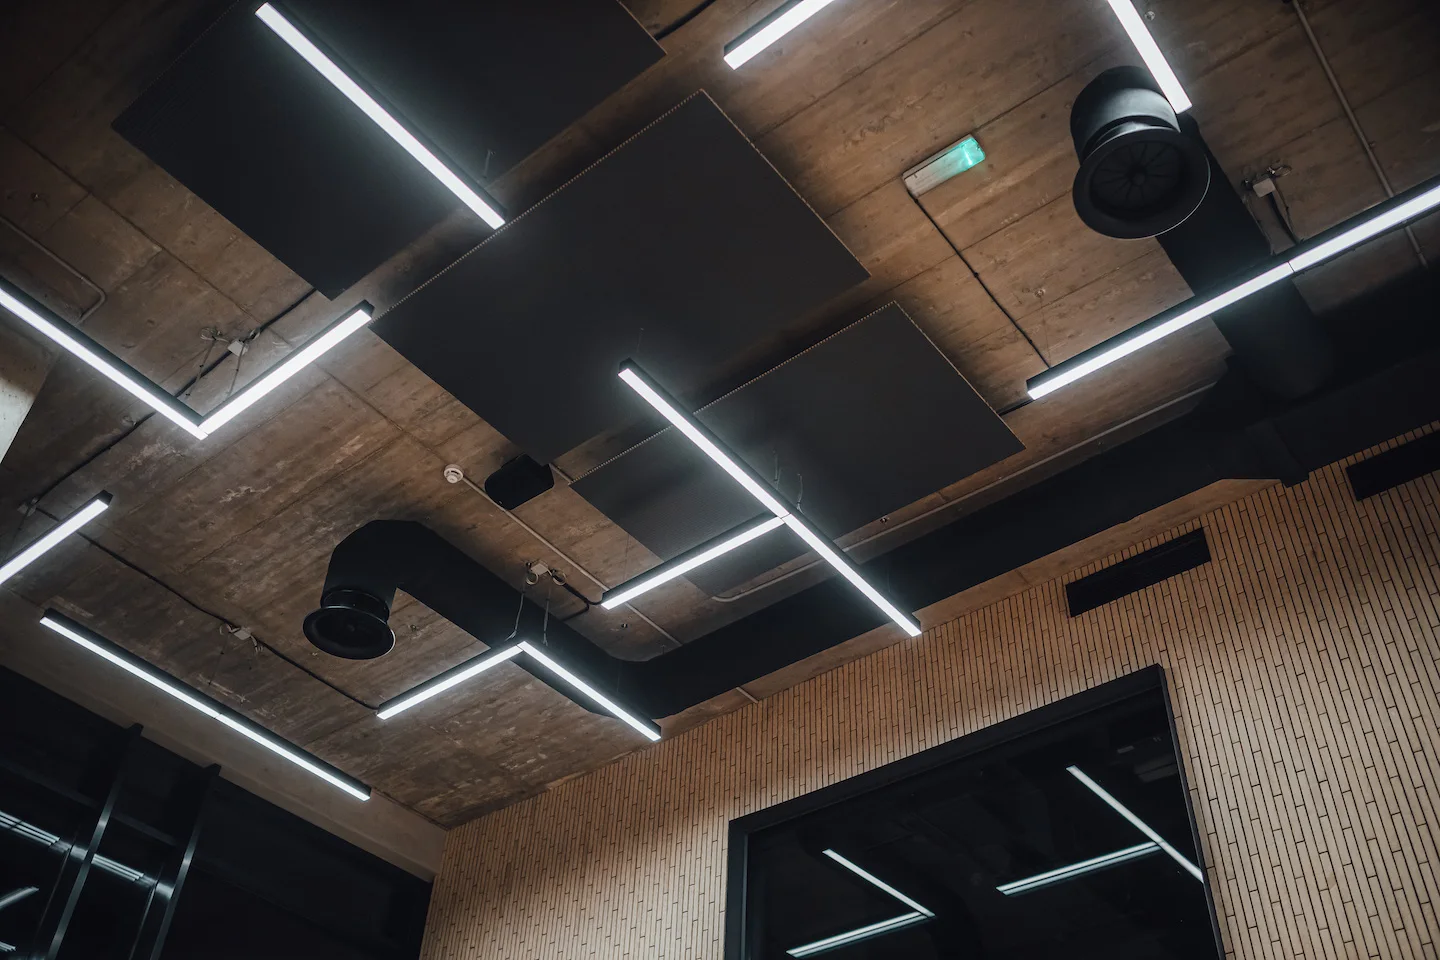 L-shaped and T-shaped LED lighting hanging from the ceiling in commercial space.